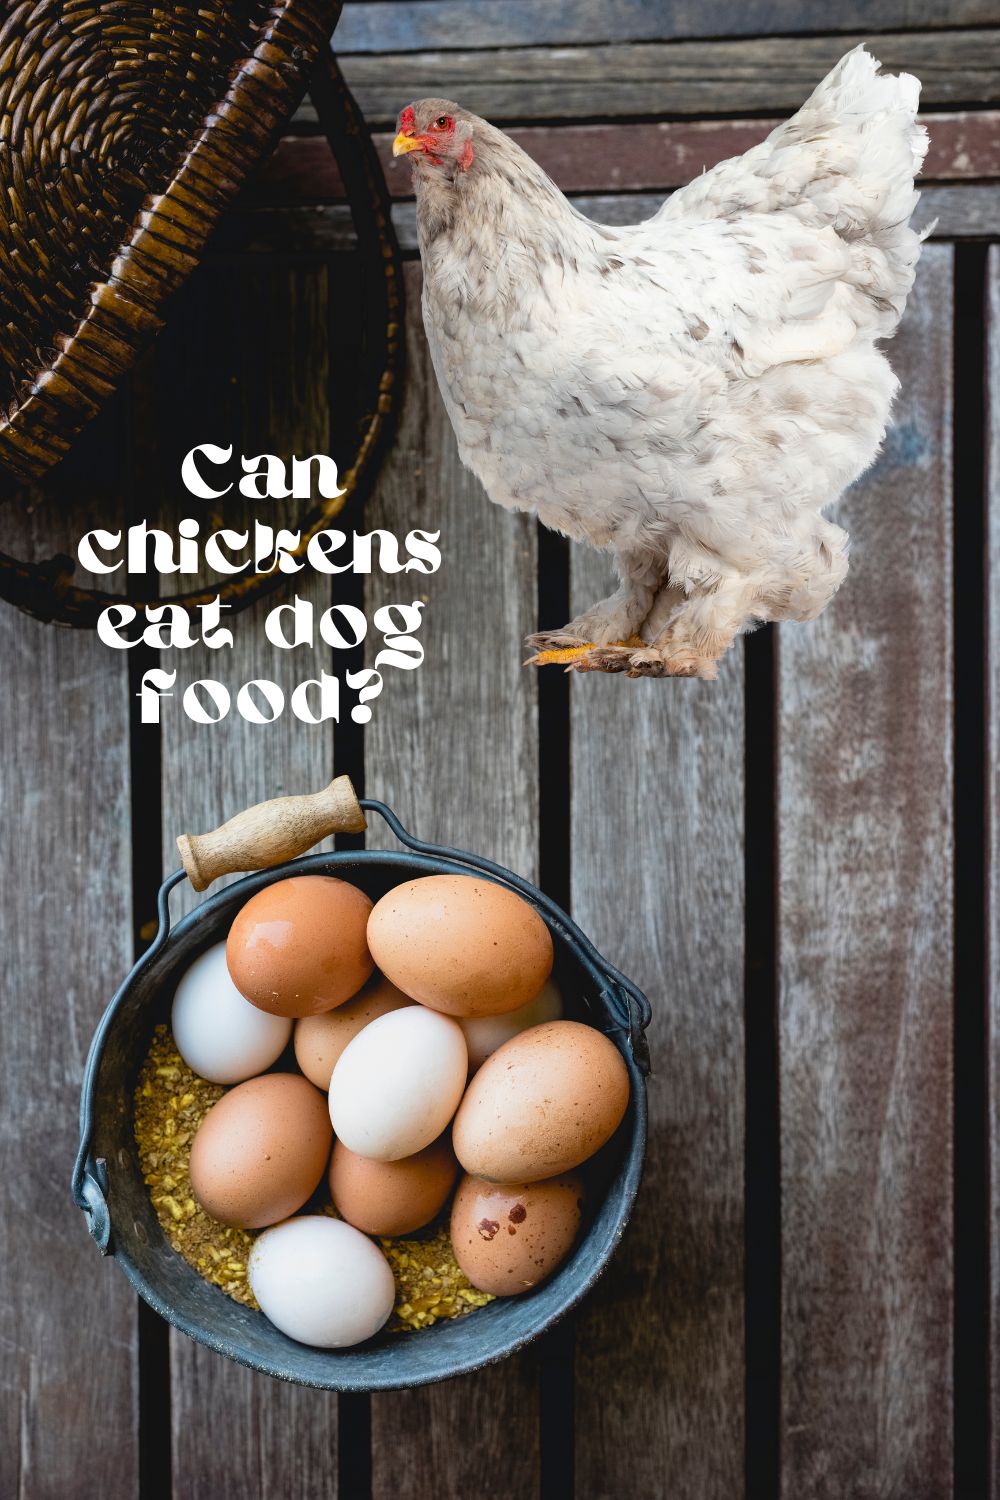 While chickens can technically eat dog food, feeding chickens dog food is not a good idea. Dog food is formulated to meet the dietary requirements of dogs, which are different from those of chickens.